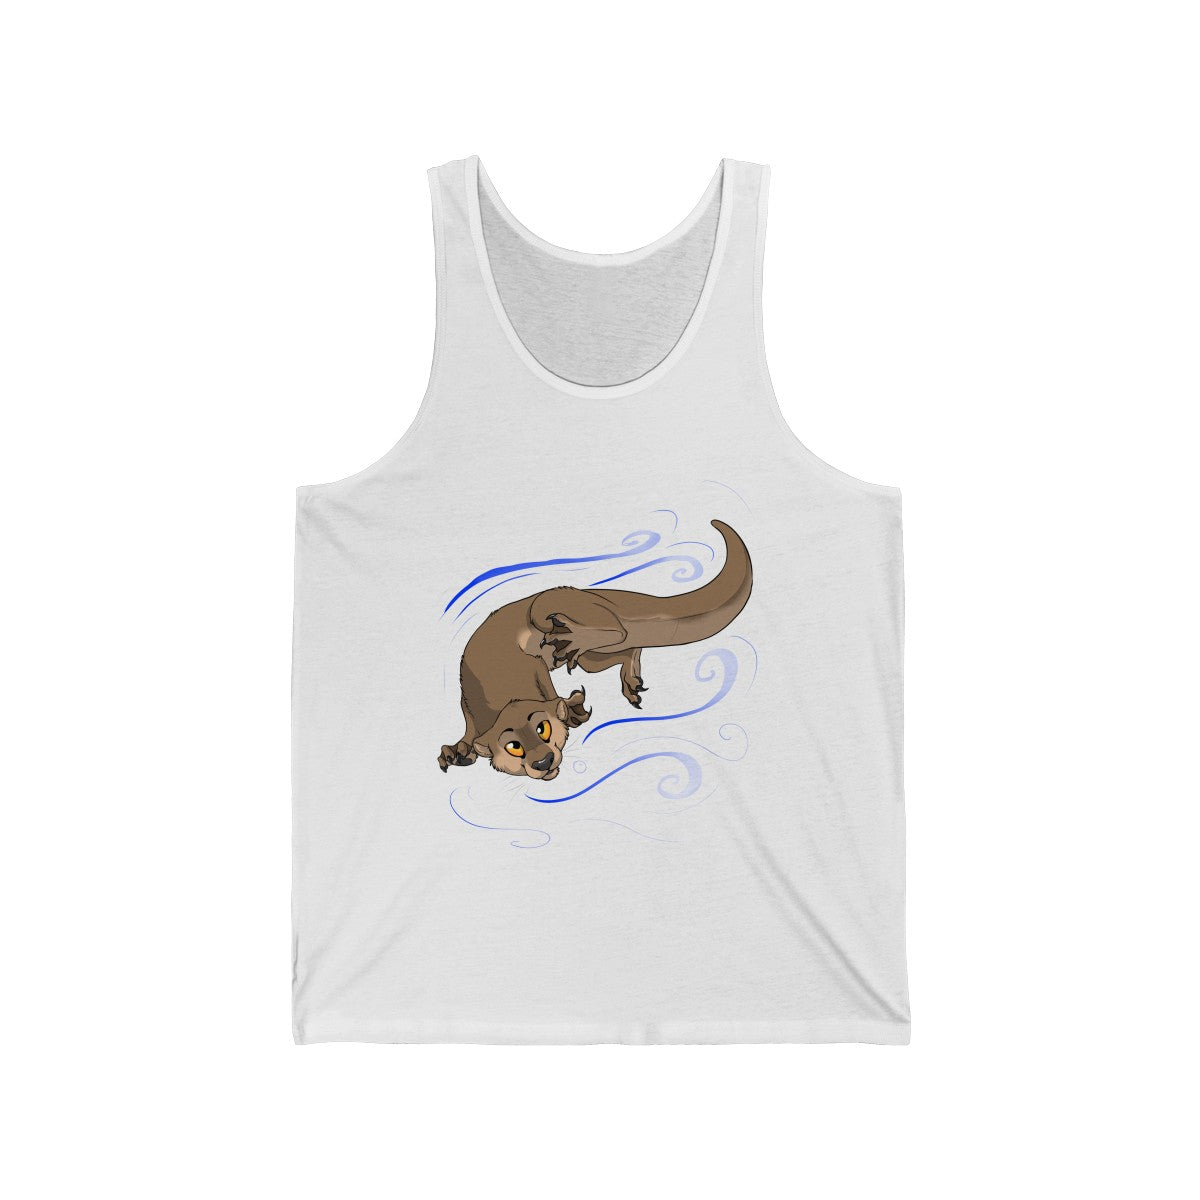 Otter - Tank Top Tank Top Dire Creatures White XS 